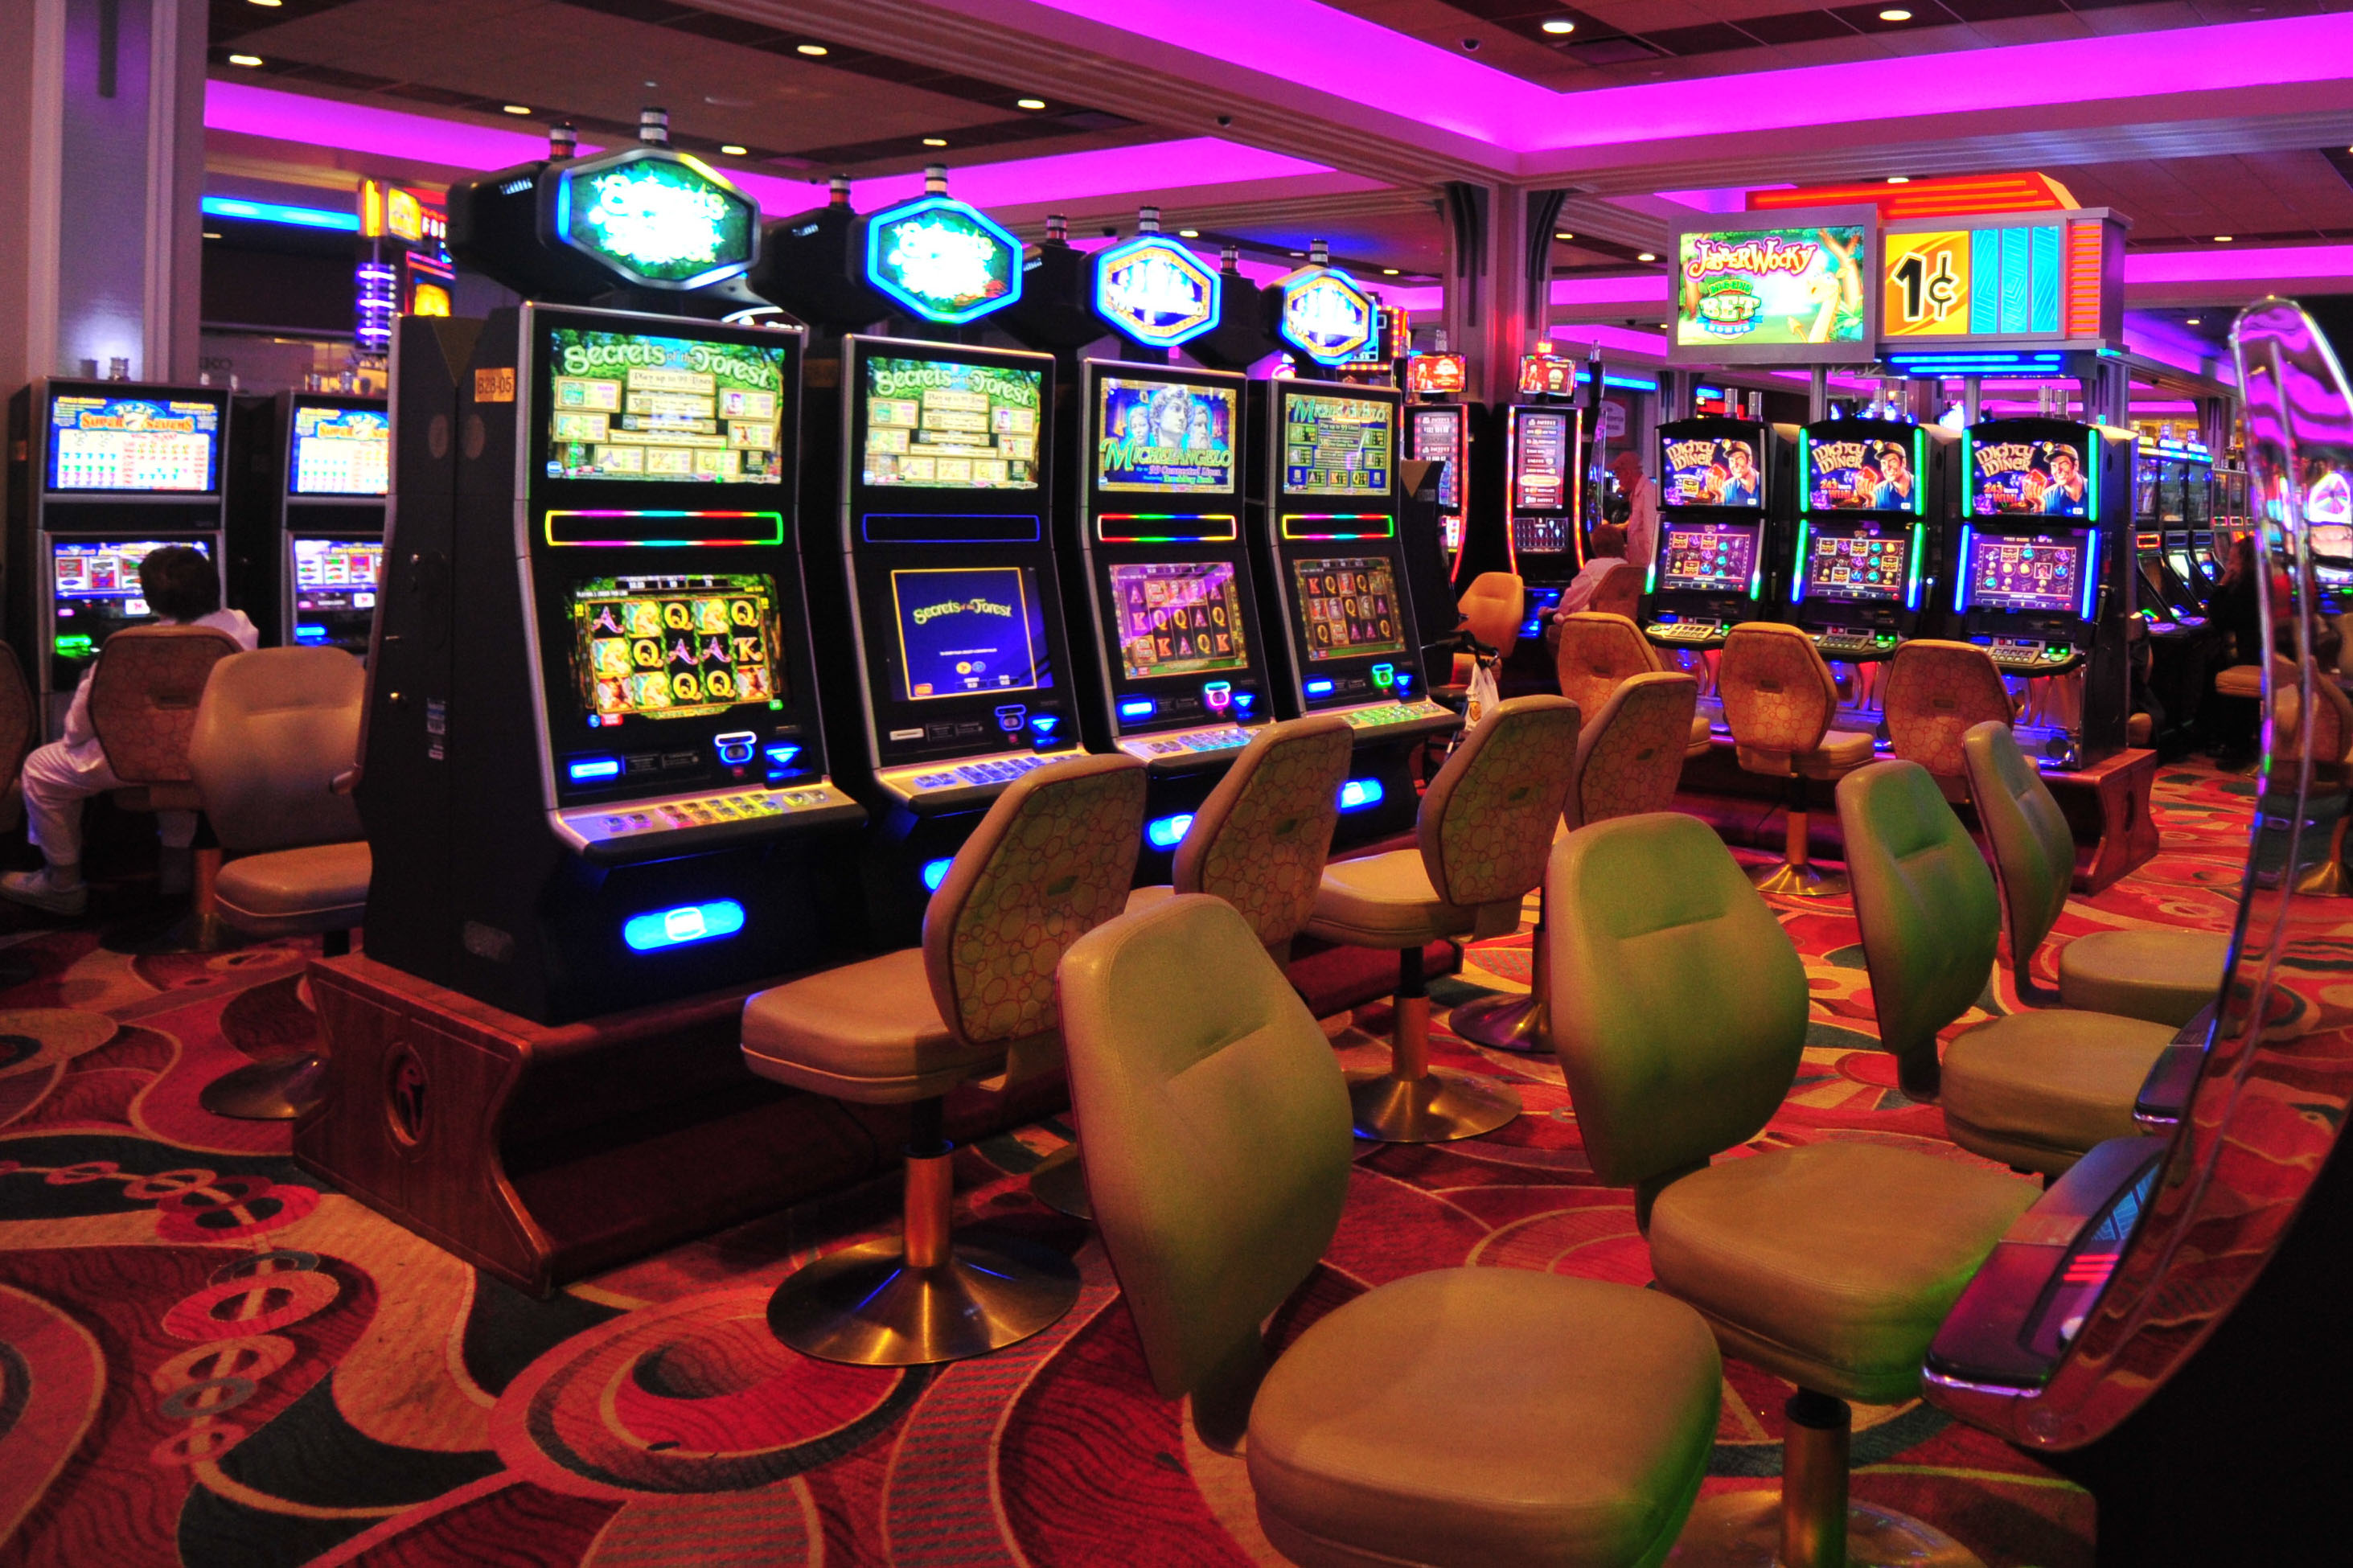 Inside Look At Casino Corporate Information